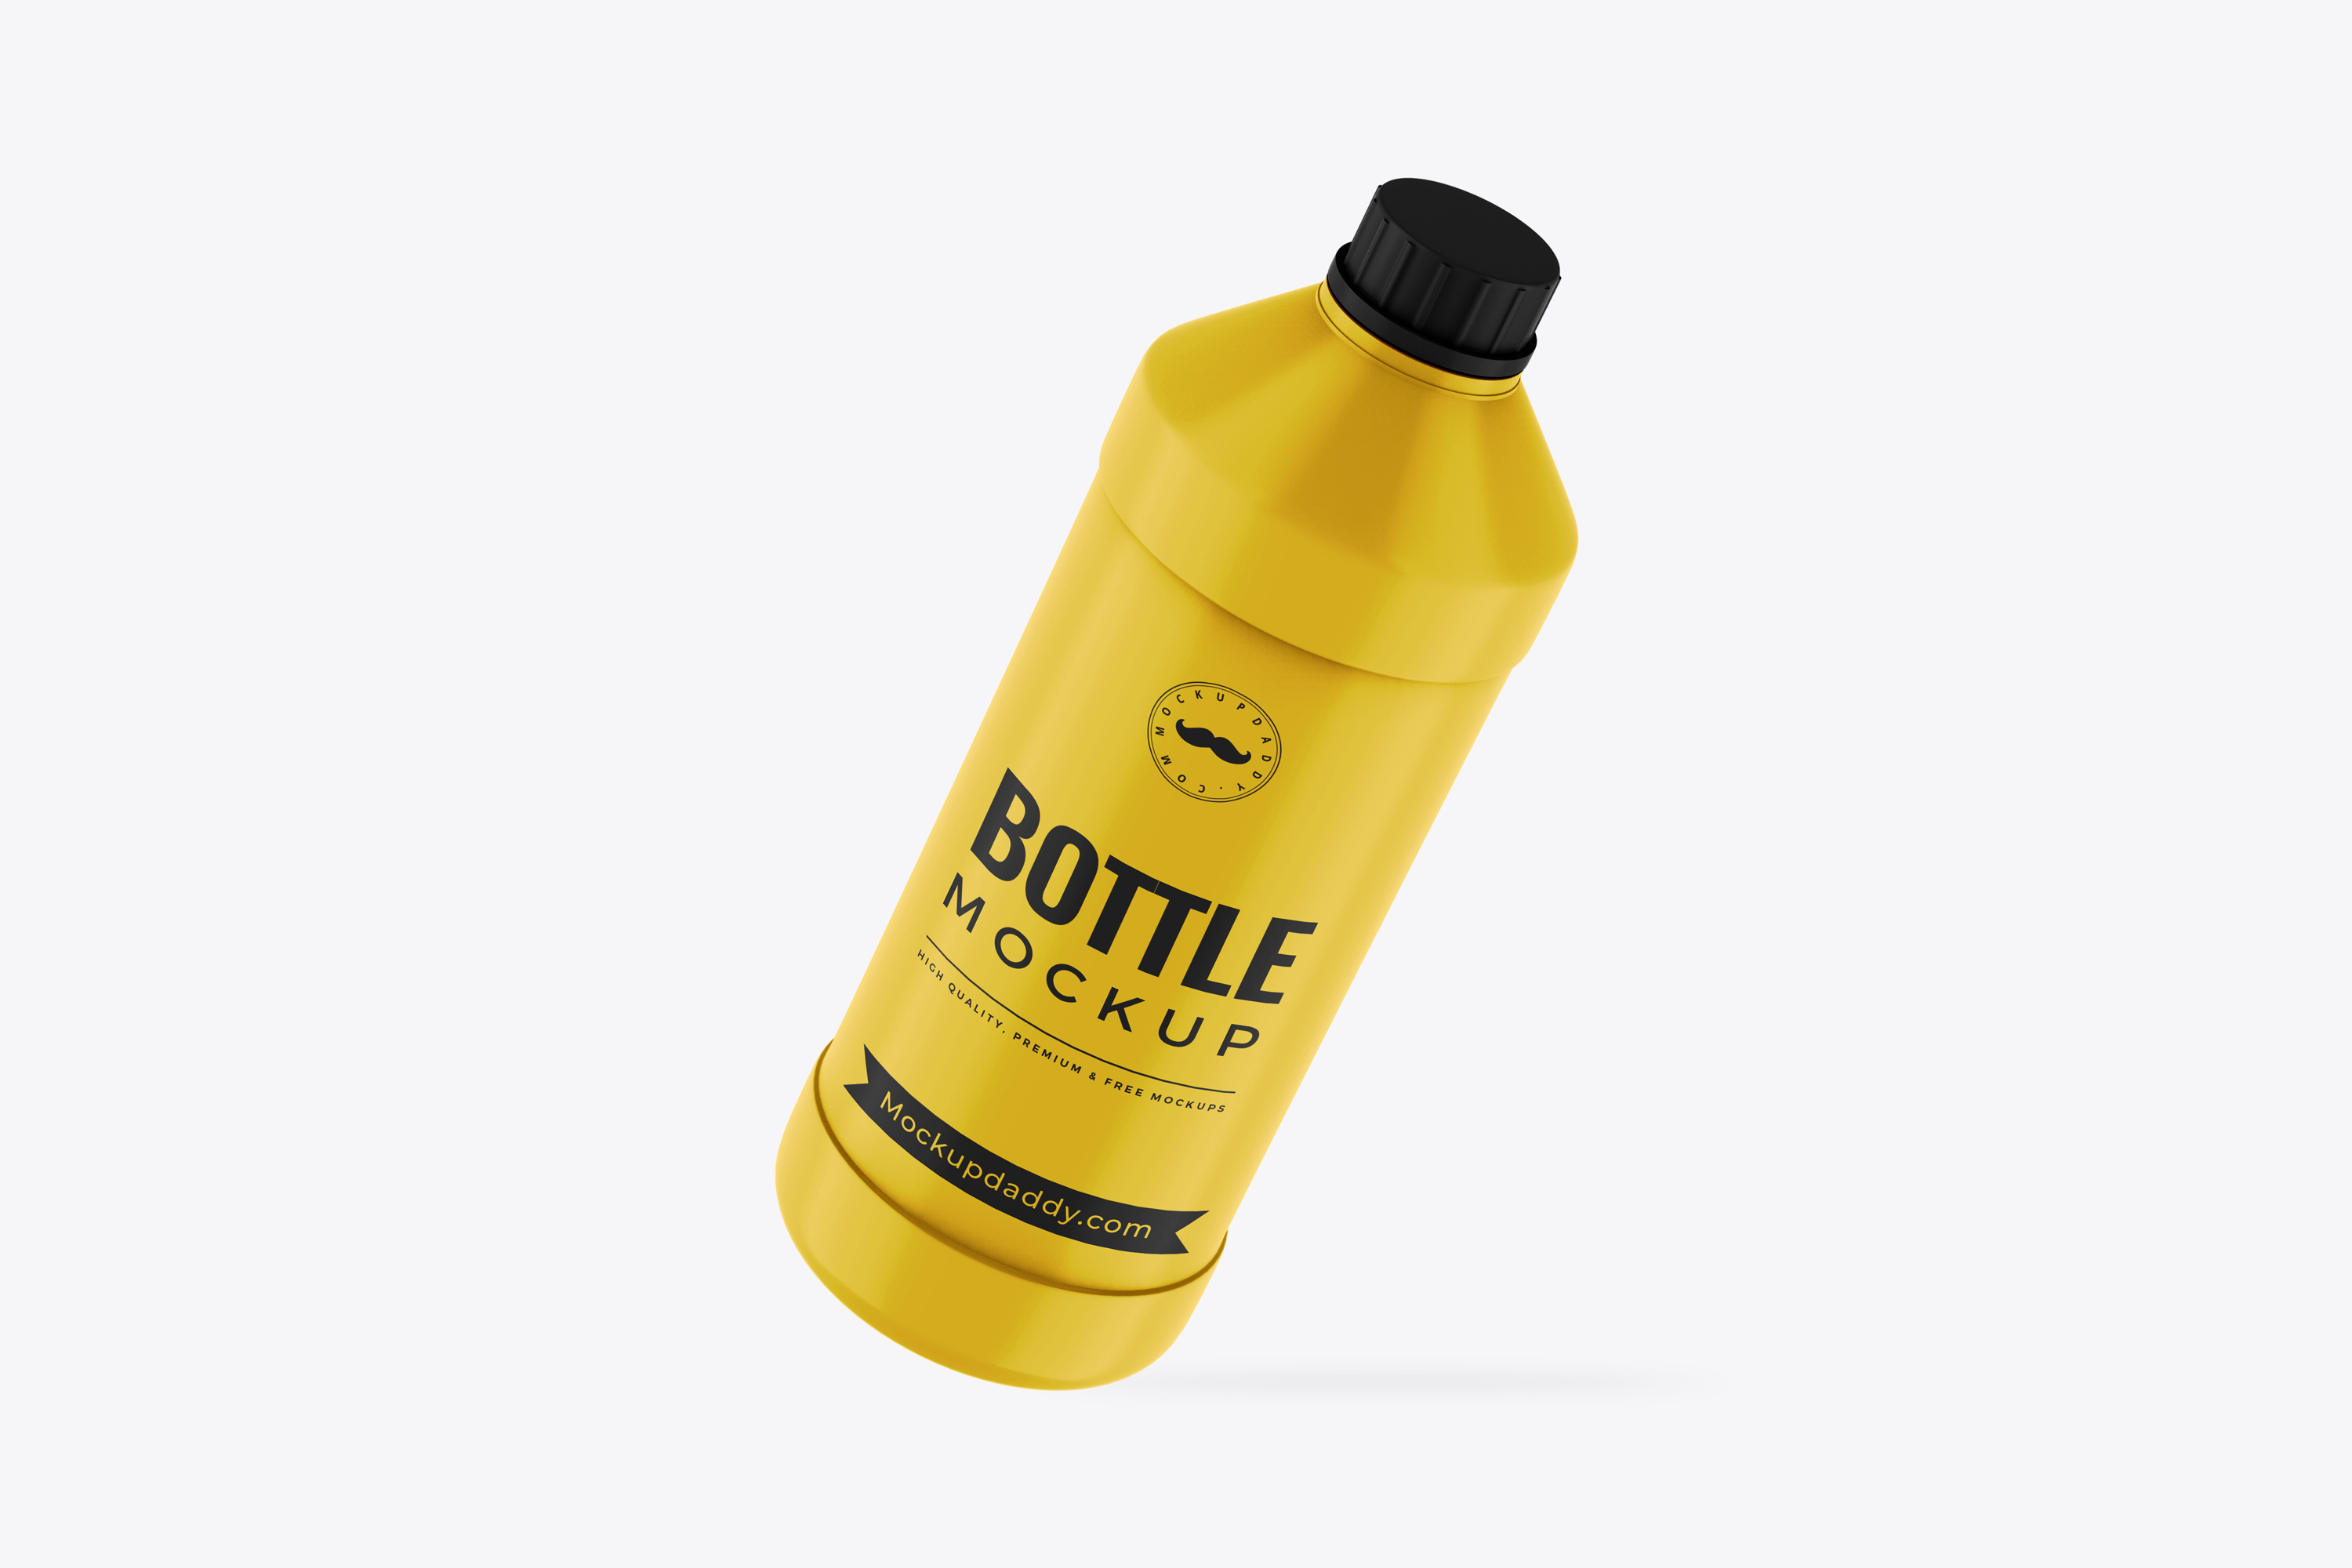 Floating yellow Detergent Bottle PSD Mockup on a white background